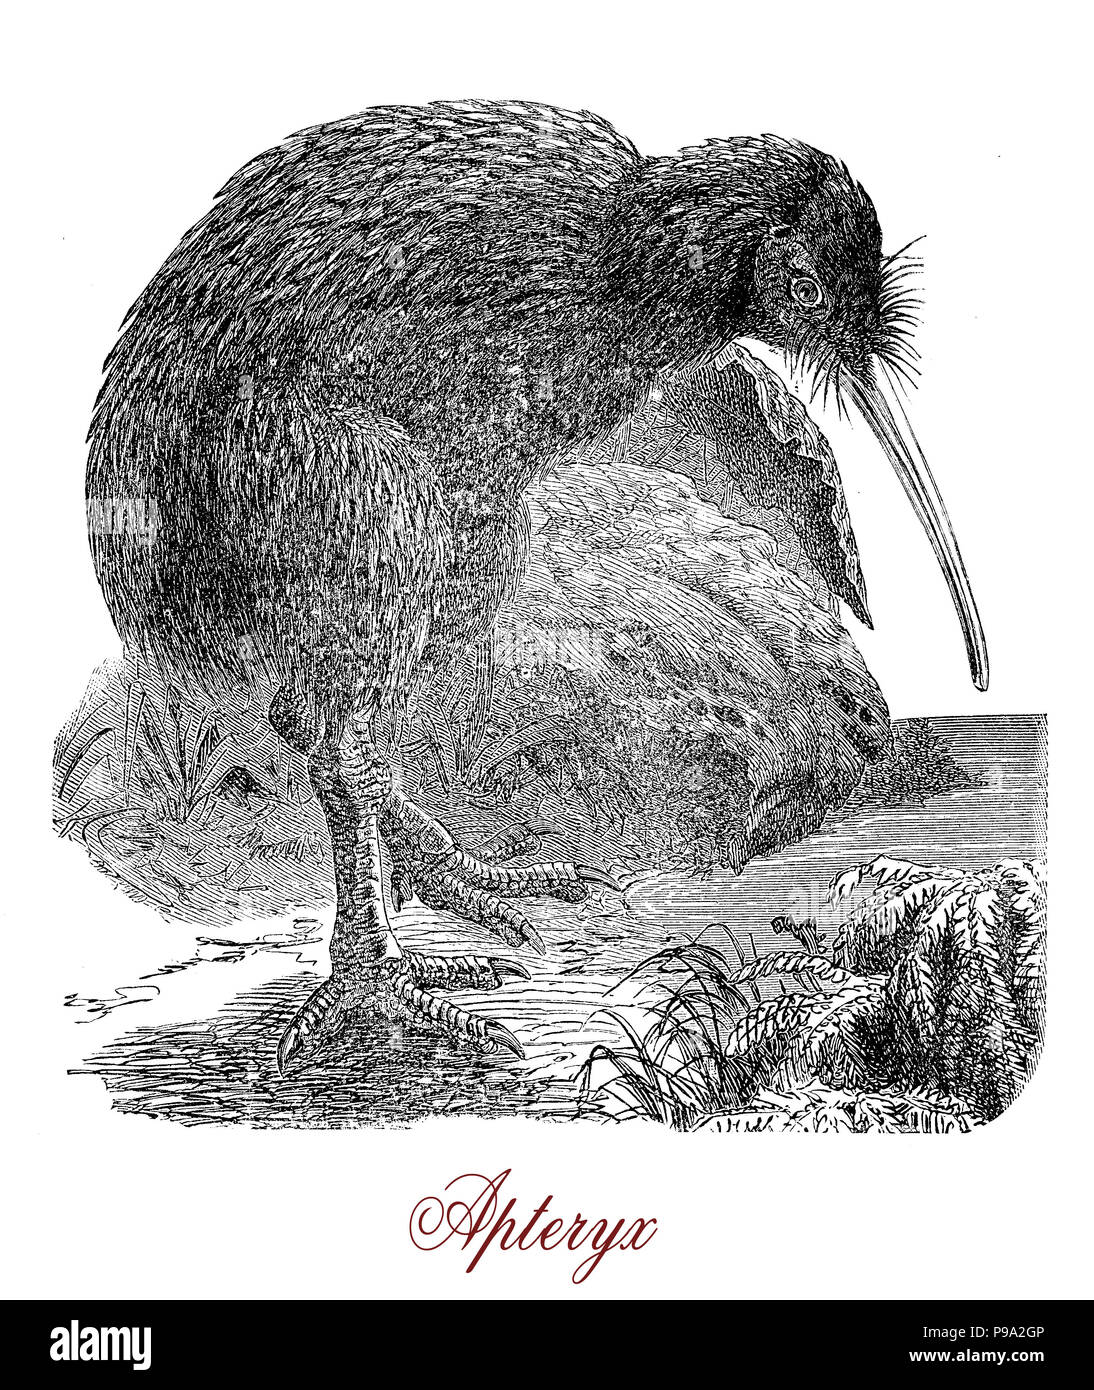 Vintage engraving of Kiwi or Apterix australis, flightless birds native to New Zealand. The greek-derived name means 'wingless'. Stock Photo